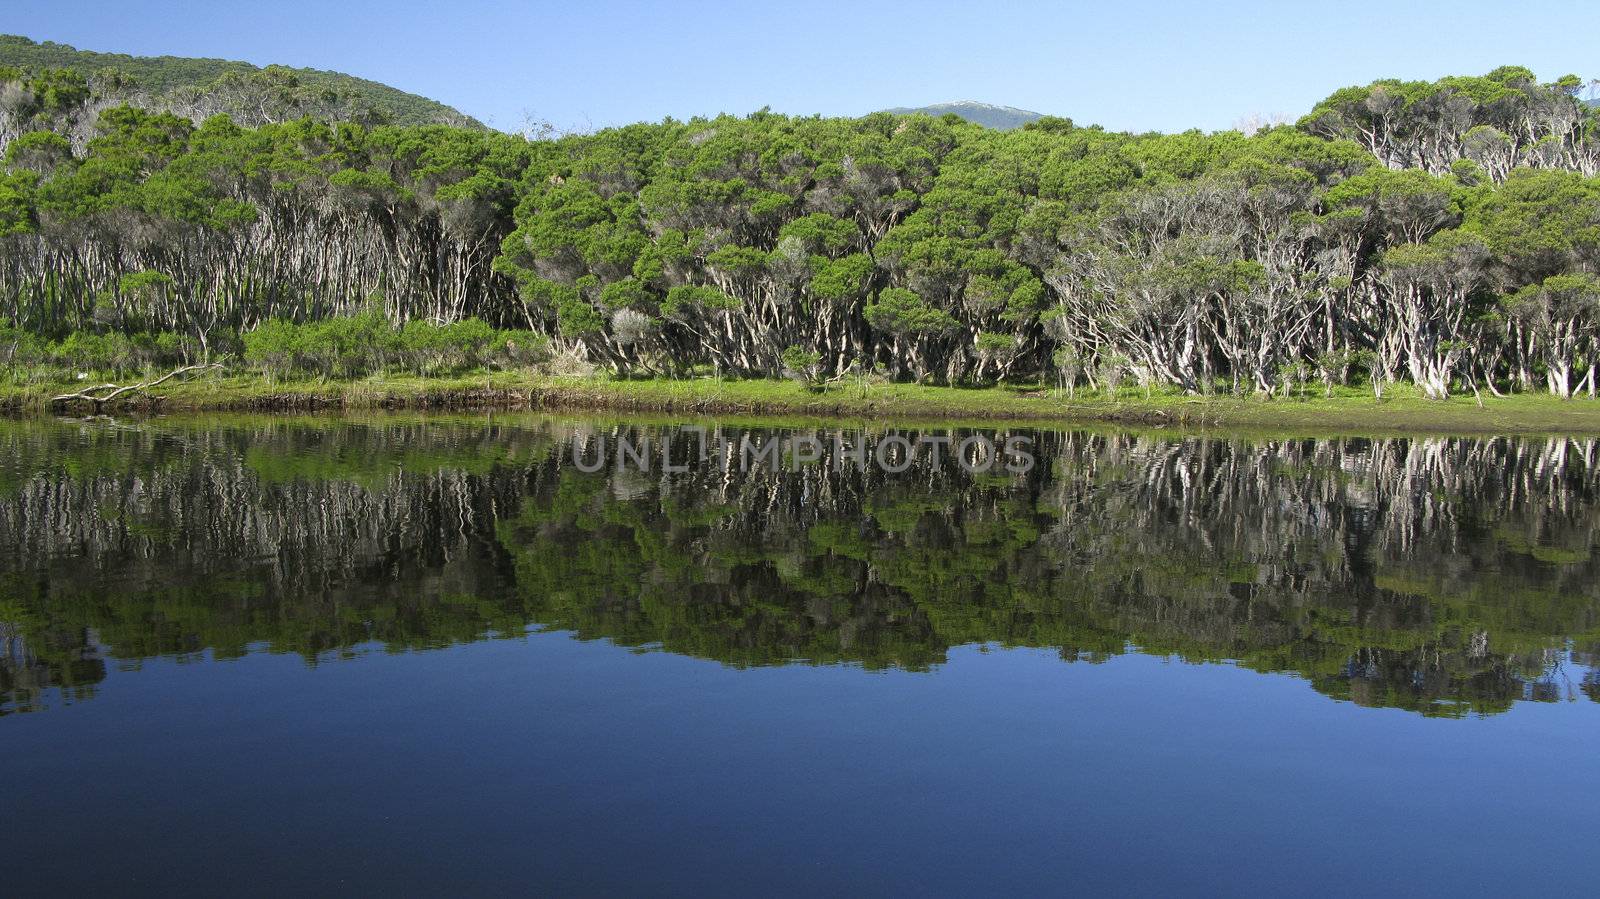 lake and eucalyptus forest in wilsons promotory national park, australia